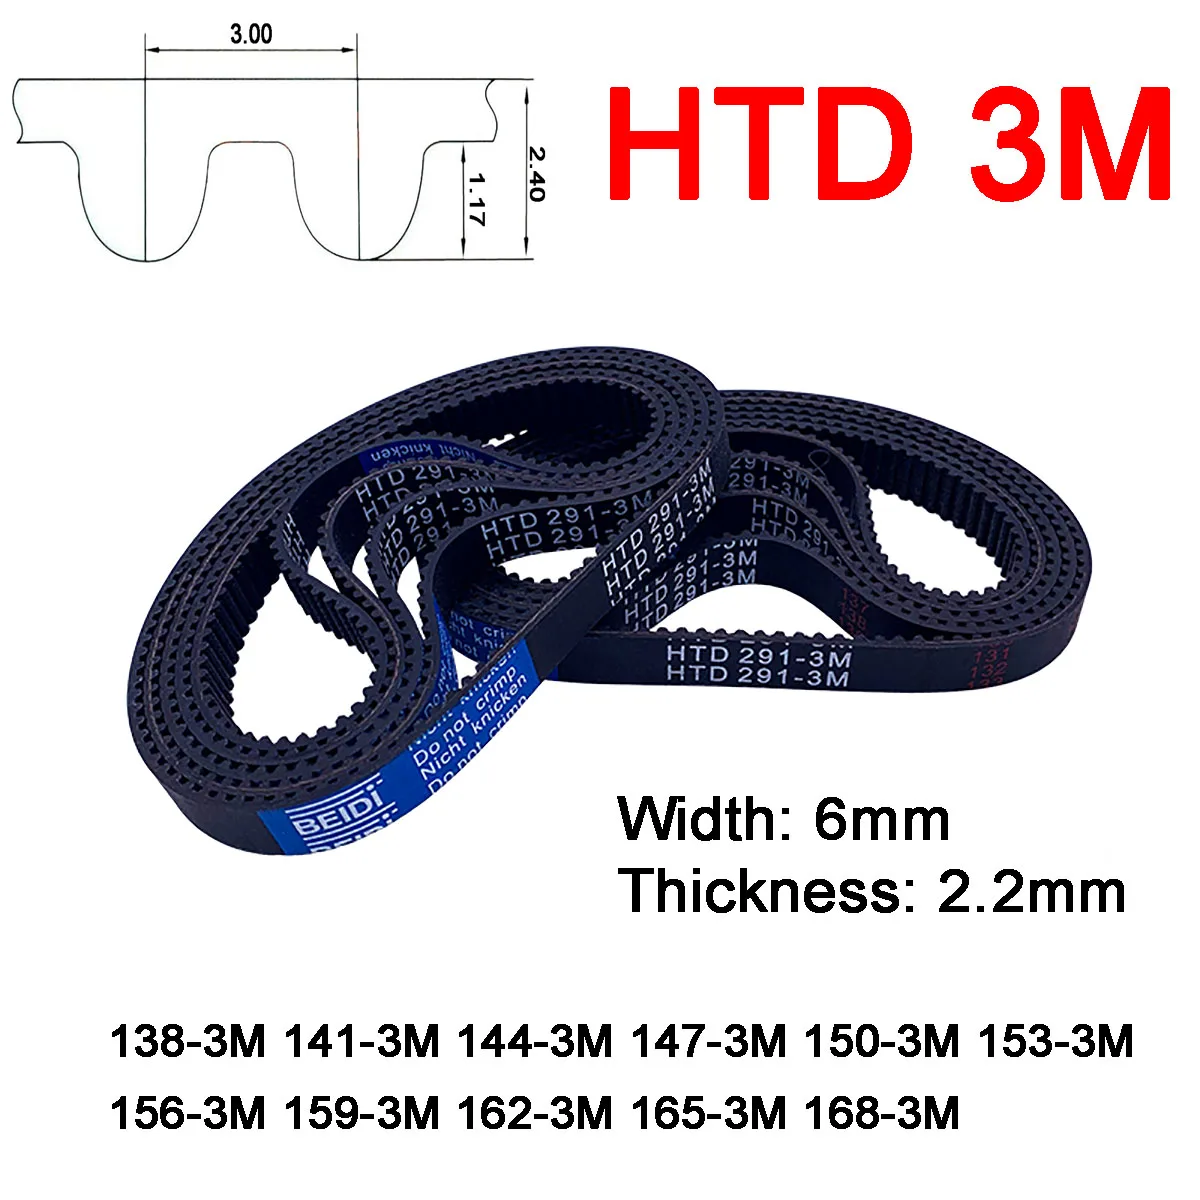 1Pc Width 6mm 3M Rubber Arc Tooth Timing Belt Pitch Length 138 141 144 147 150 153 156 159 162 165 168mm Synchronous Belt Closed